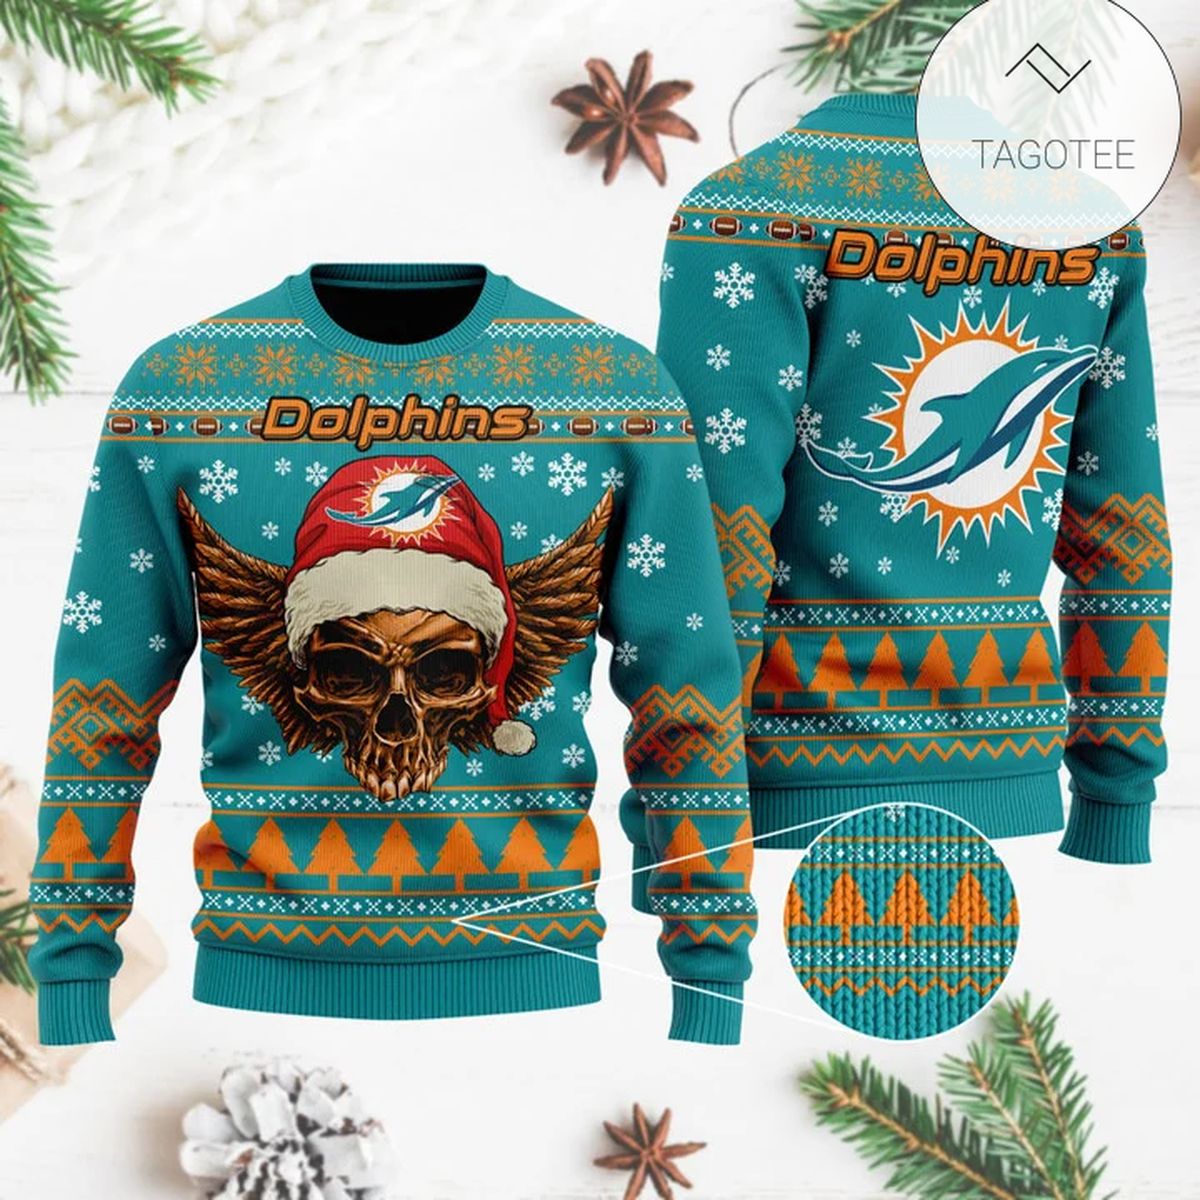 Miami Dolphins Shop - NFL Miami Dolphins Ugly Christmas Sweater Skull Xmas